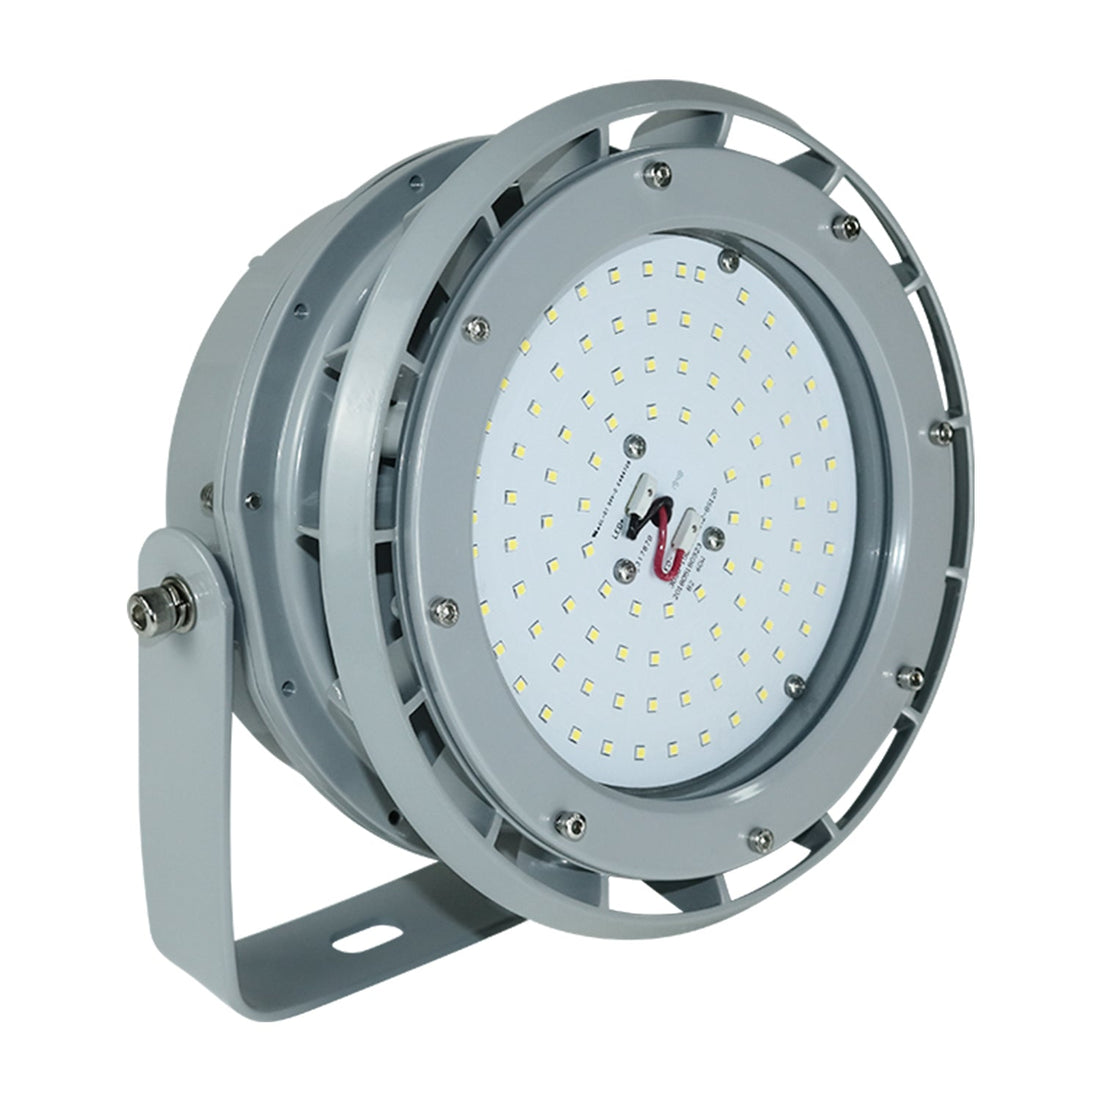 B Series 300W Dimmable LED Explosion Proof Round High Bay Light - 5000K, 42000LM, IP66 Rated for Hazardous Locations - Ideal for Oil &amp; Gas Refineries, Drilling Rigs, Petrochemical Facilities